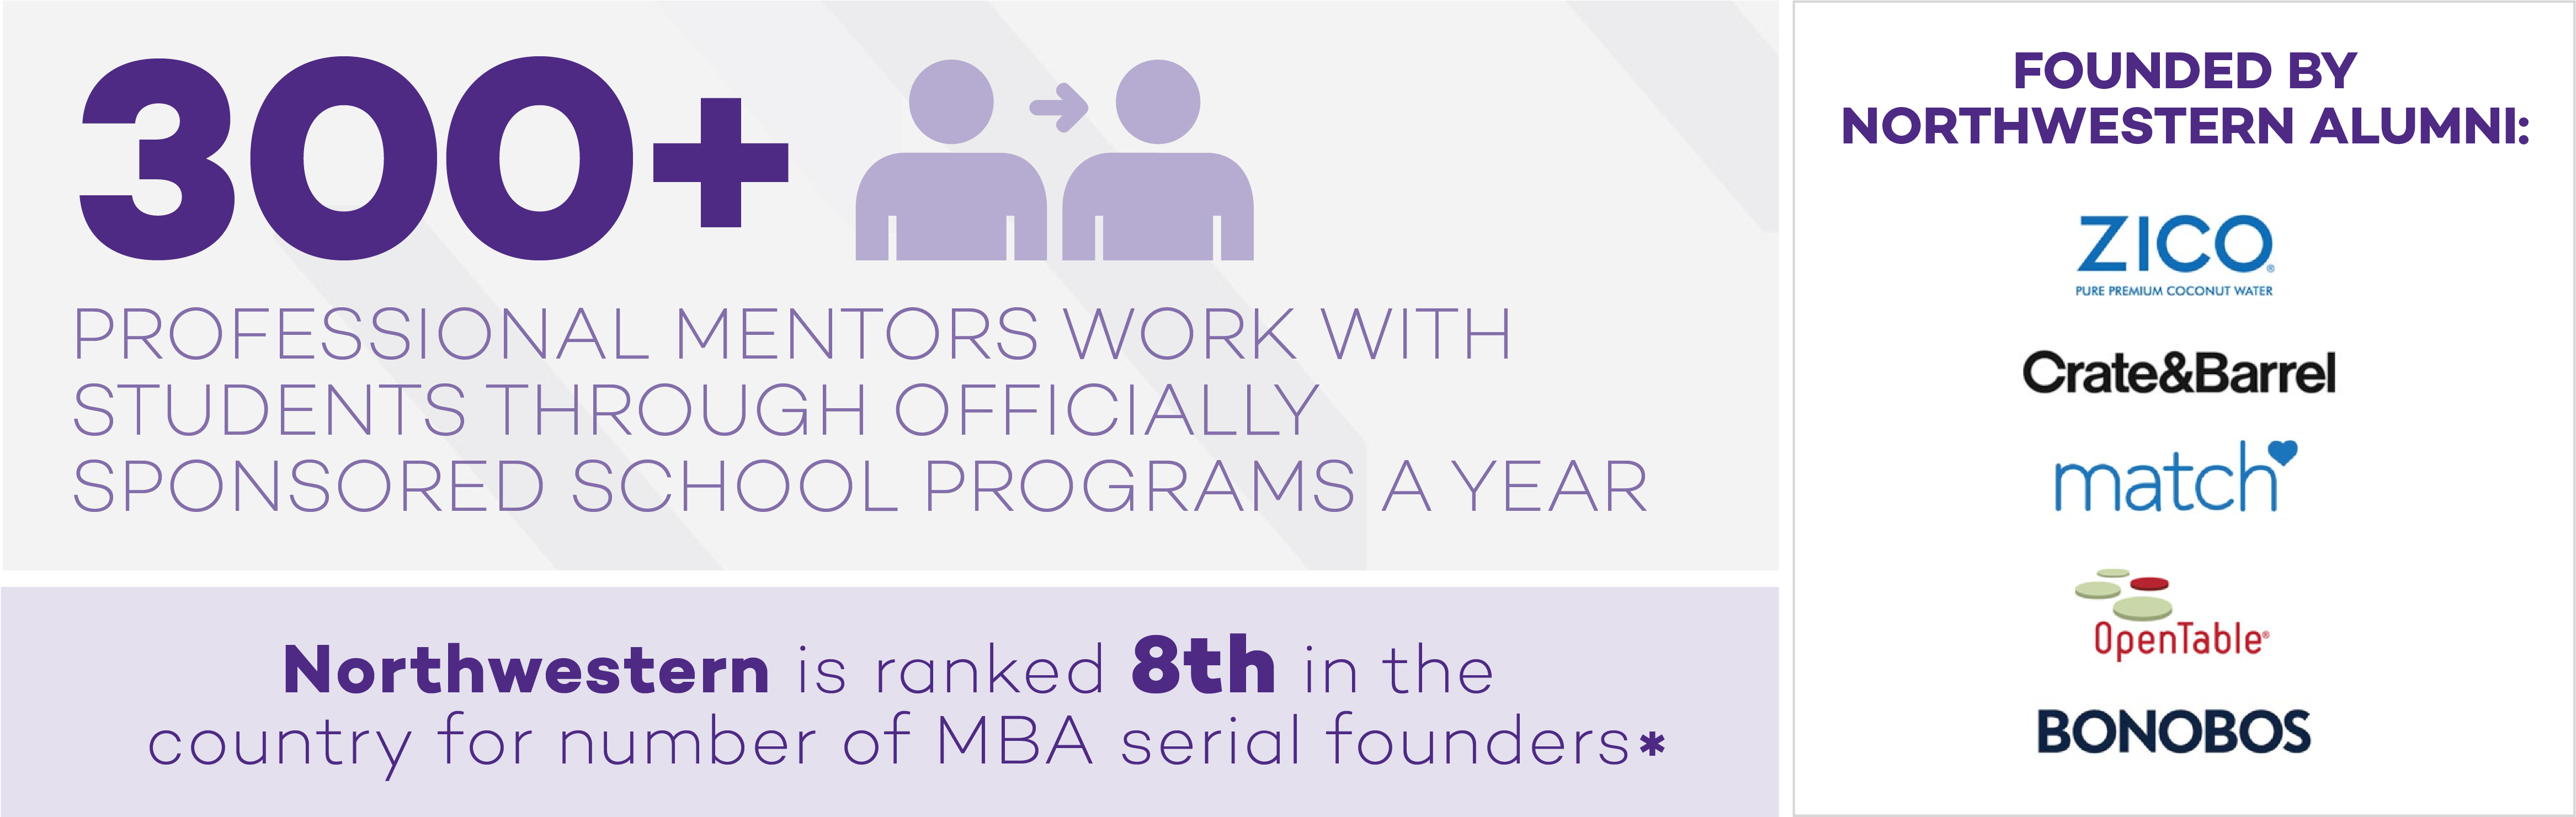 300+ professional mentors work with students through officially sponsored school programs a year.  Northwestern is ranked 8th in the country for number of MBA serial founders. Founded by Northwestern alumni: Zico, Crate & Barrel, Match, OpenTable, Bonobos.